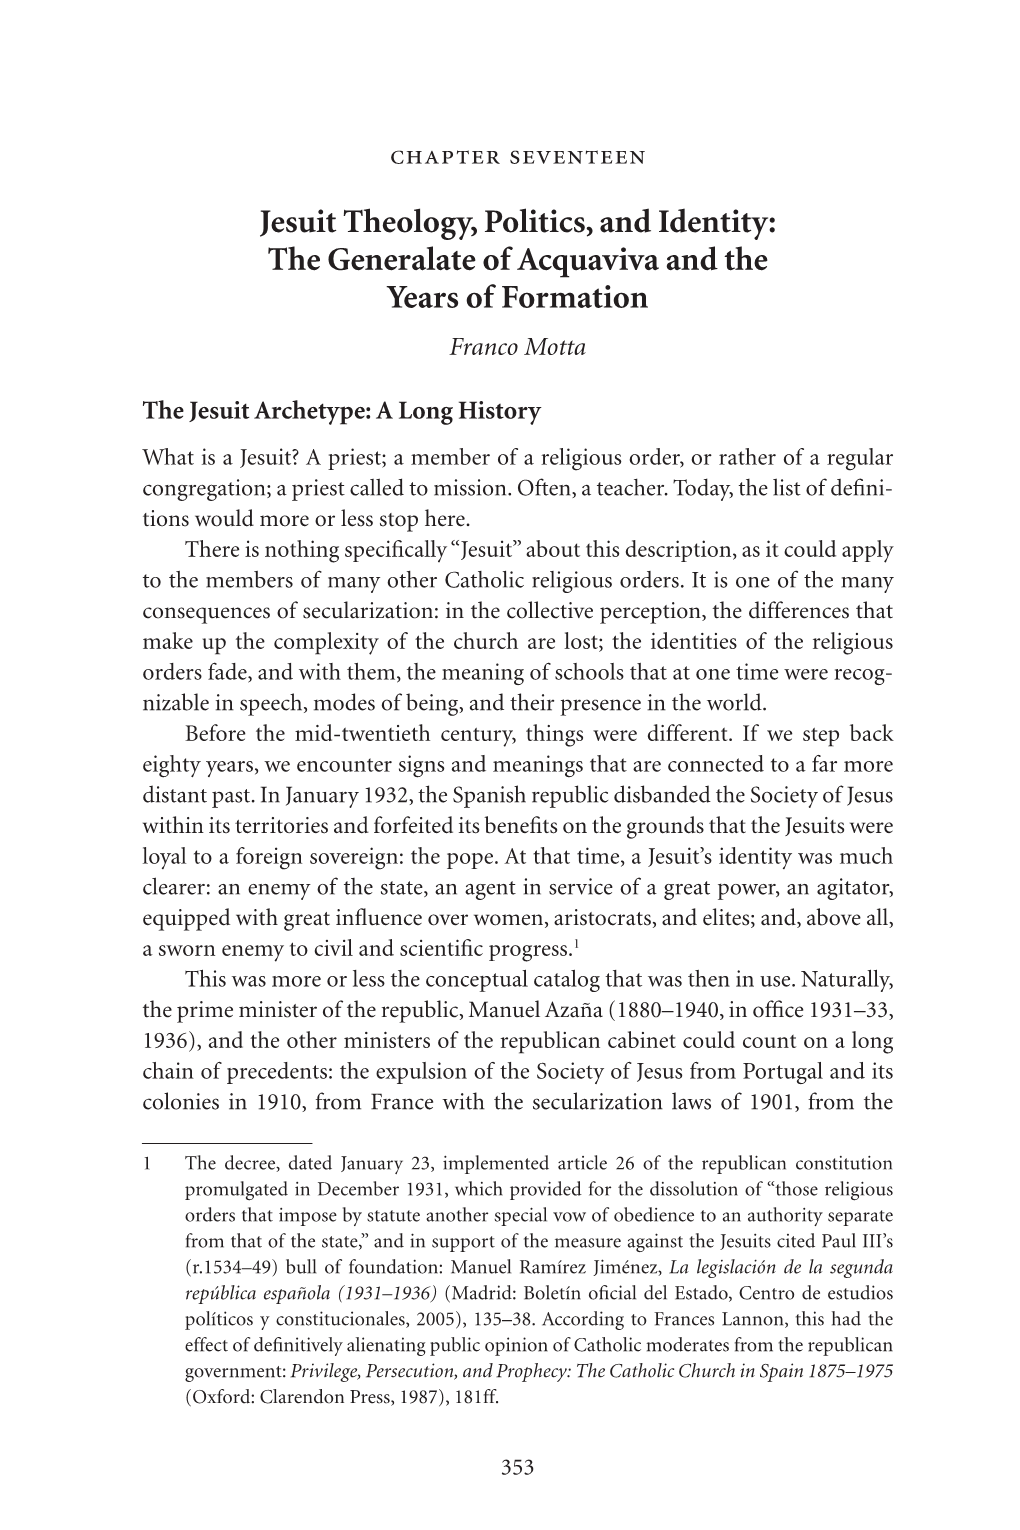 Jesuit Theology, Politics, and Identity: the Generalate of Acquaviva and the Years of Formation Franco Motta